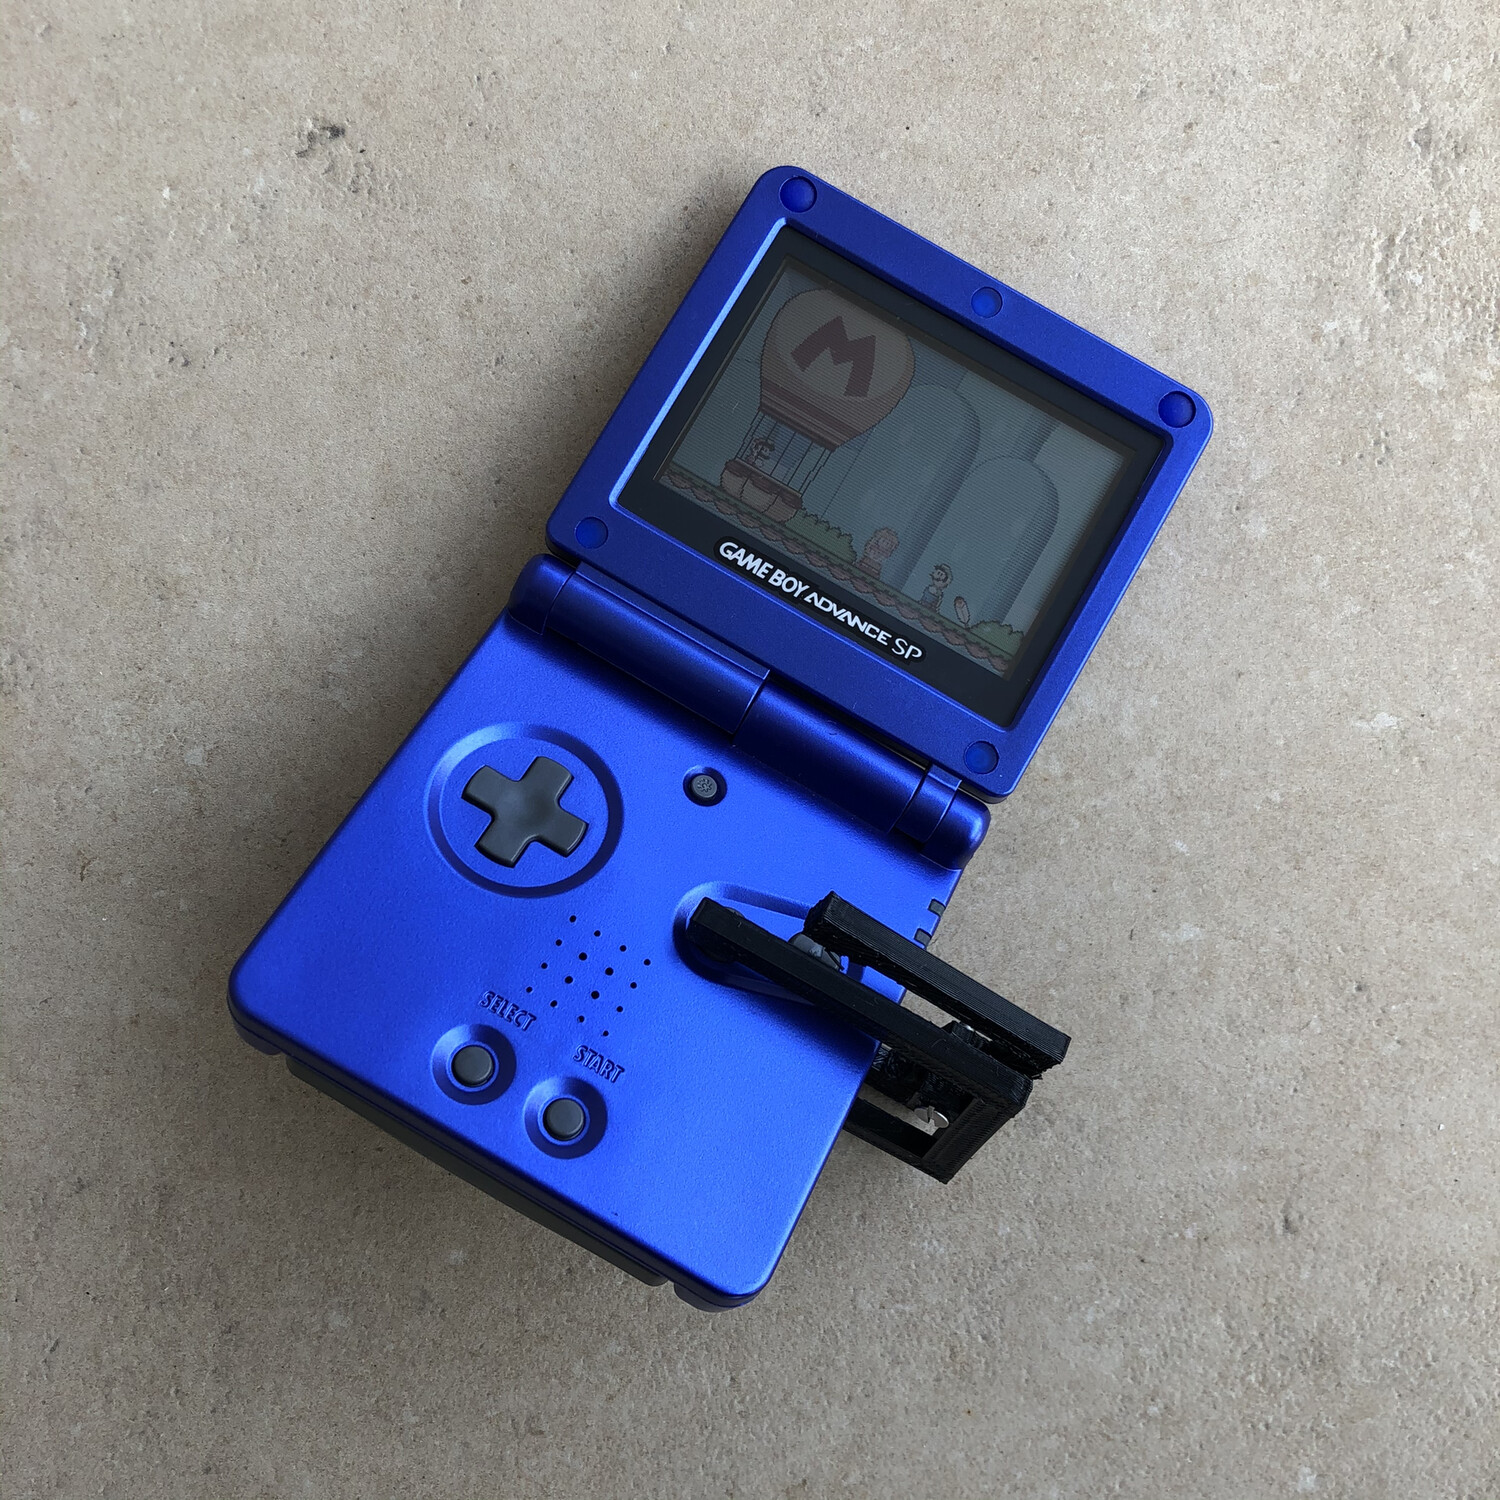 GameBoy Advance SP ONE HAND (Left)